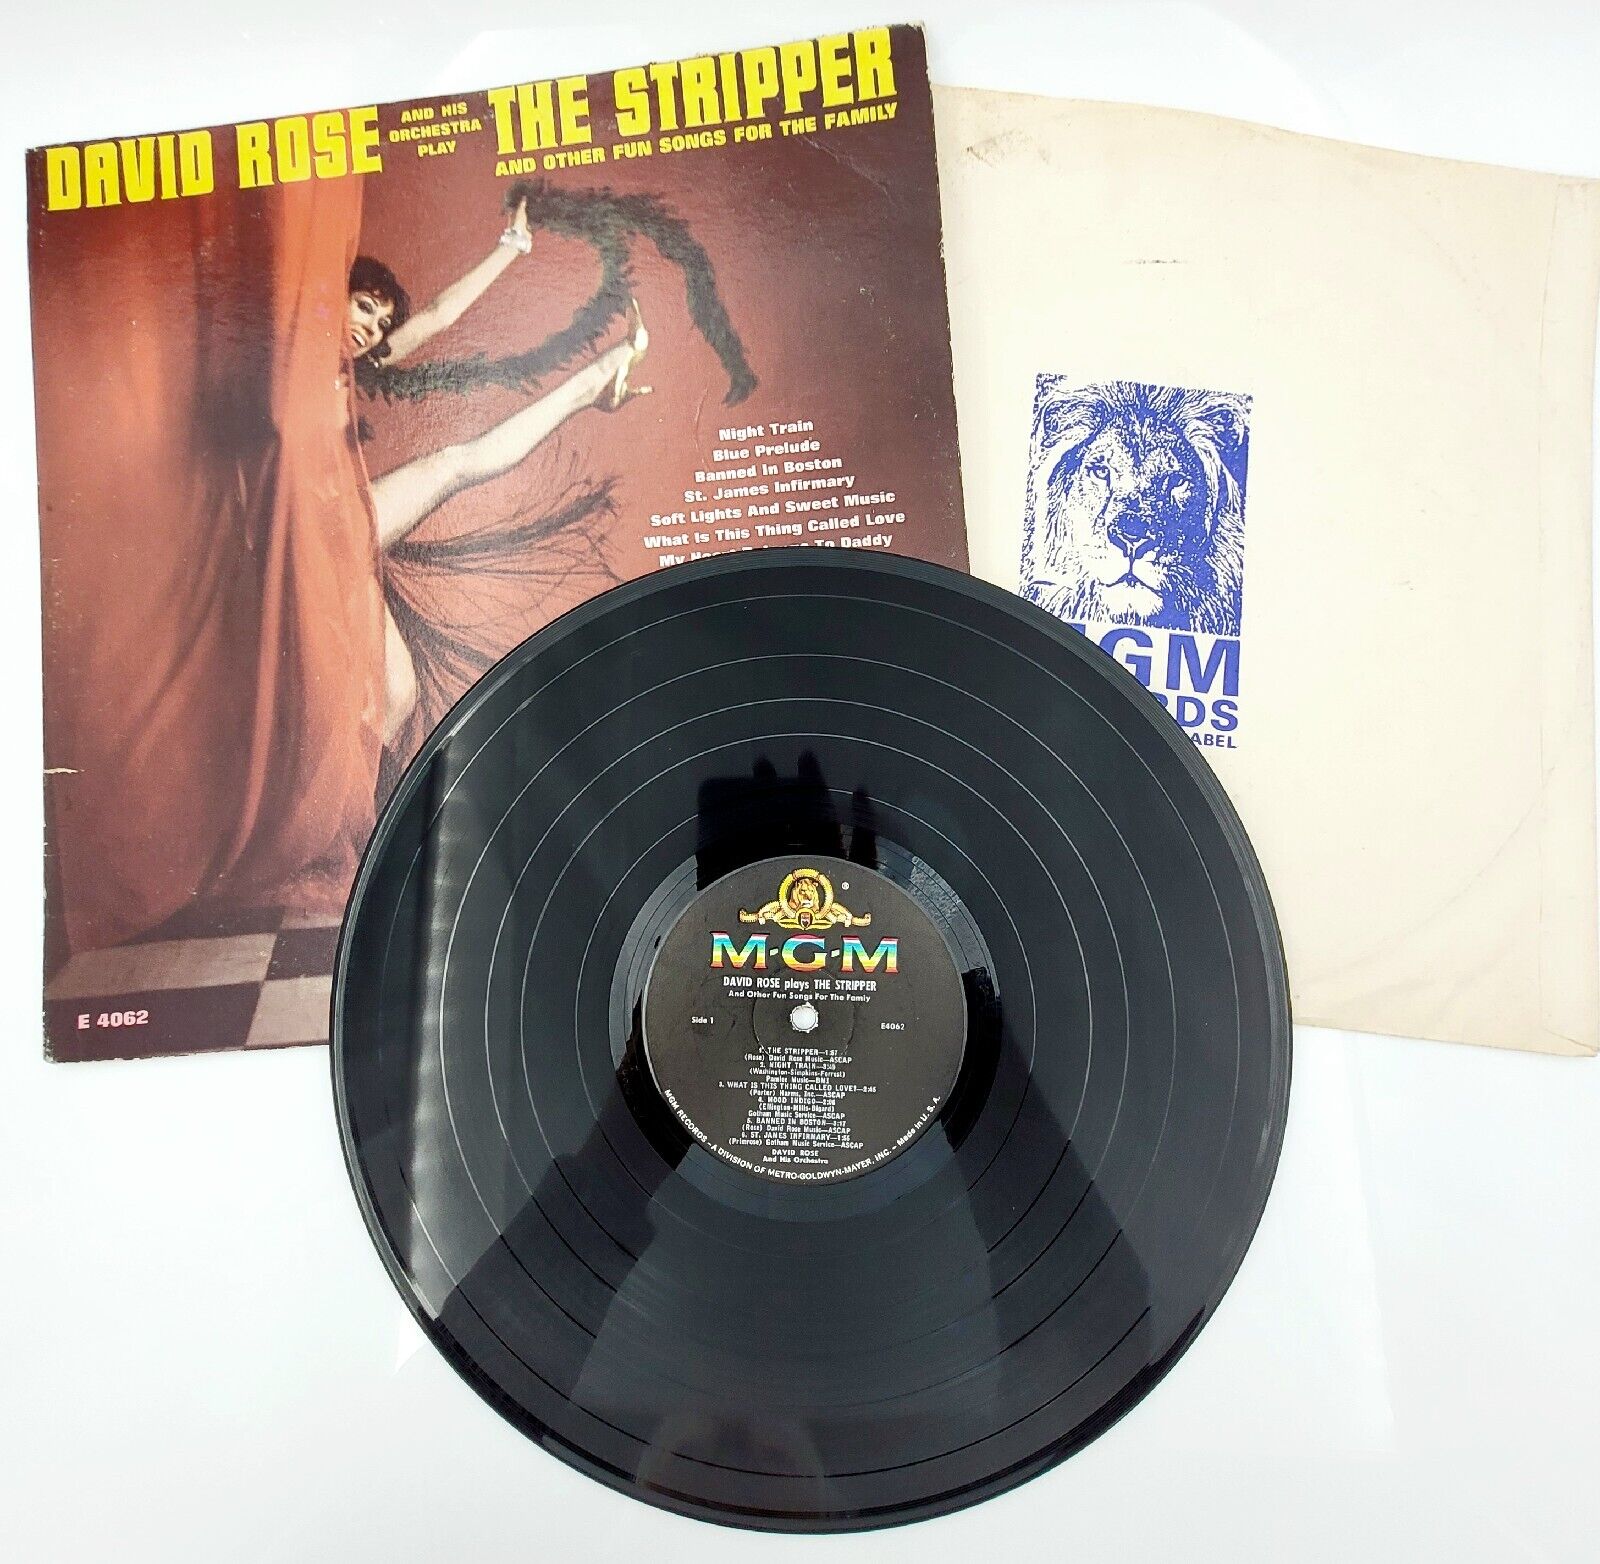 David Rose and His Orchestra Play The Stripper Vintage Vinyl Record LP SE 4062